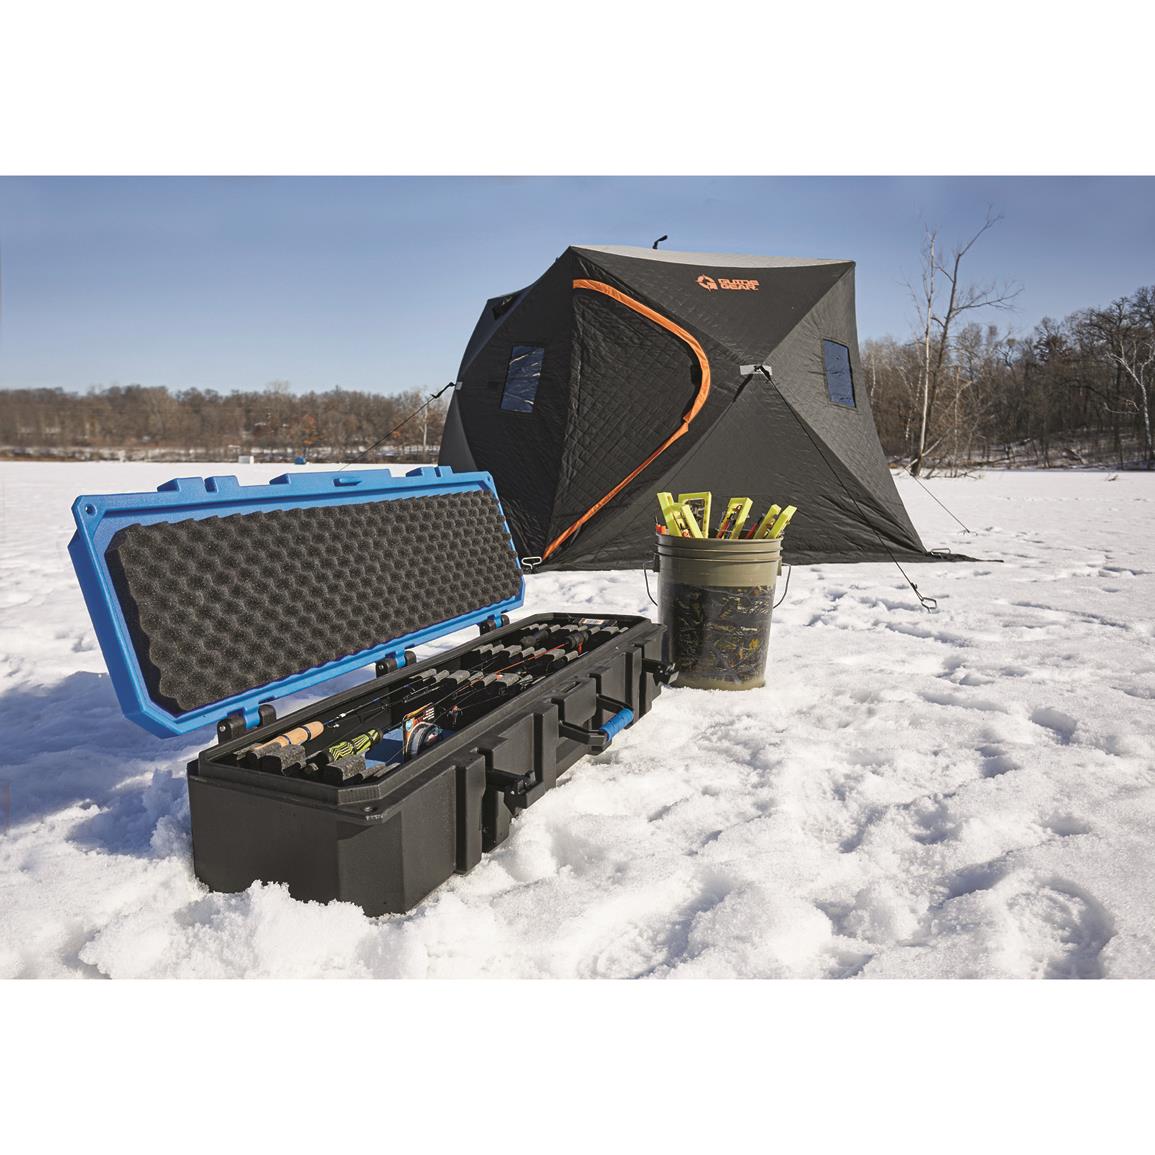 Otter Pro Jump Seat - 729014, Ice Fishing Accessories at